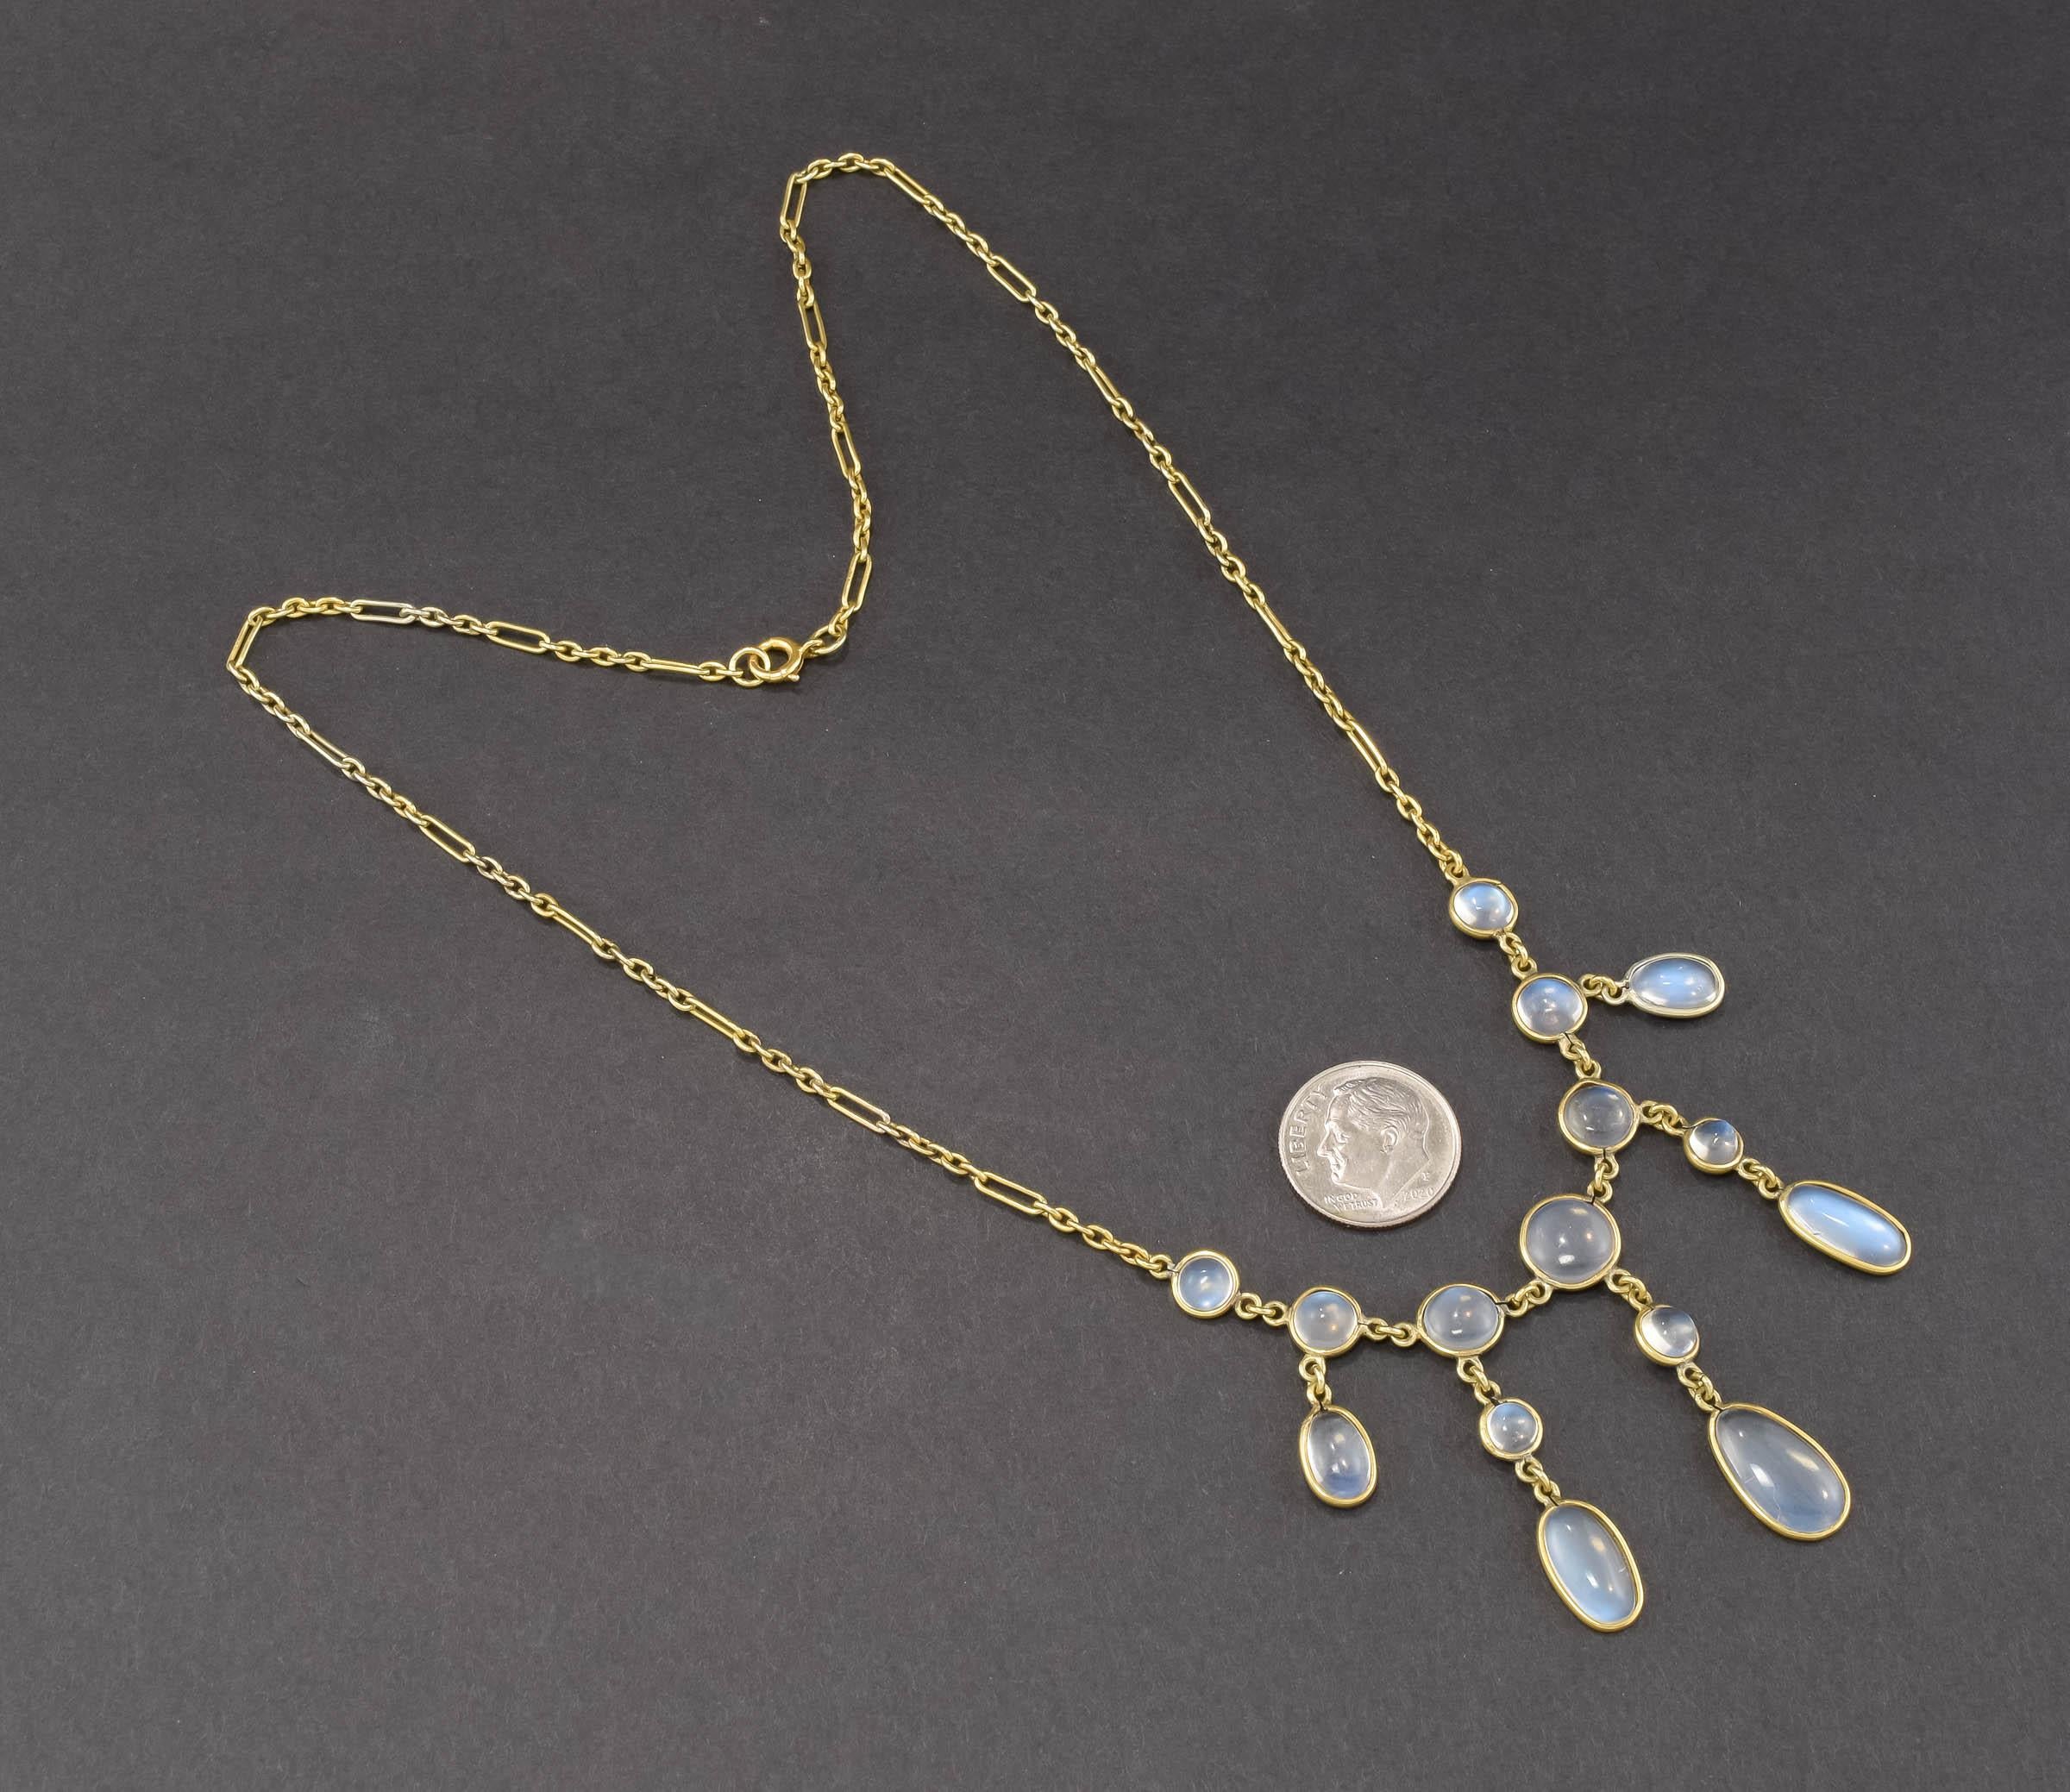 Cabochon Antique 15K Gold Moonstone Drop Necklace with Fancy Link Chain